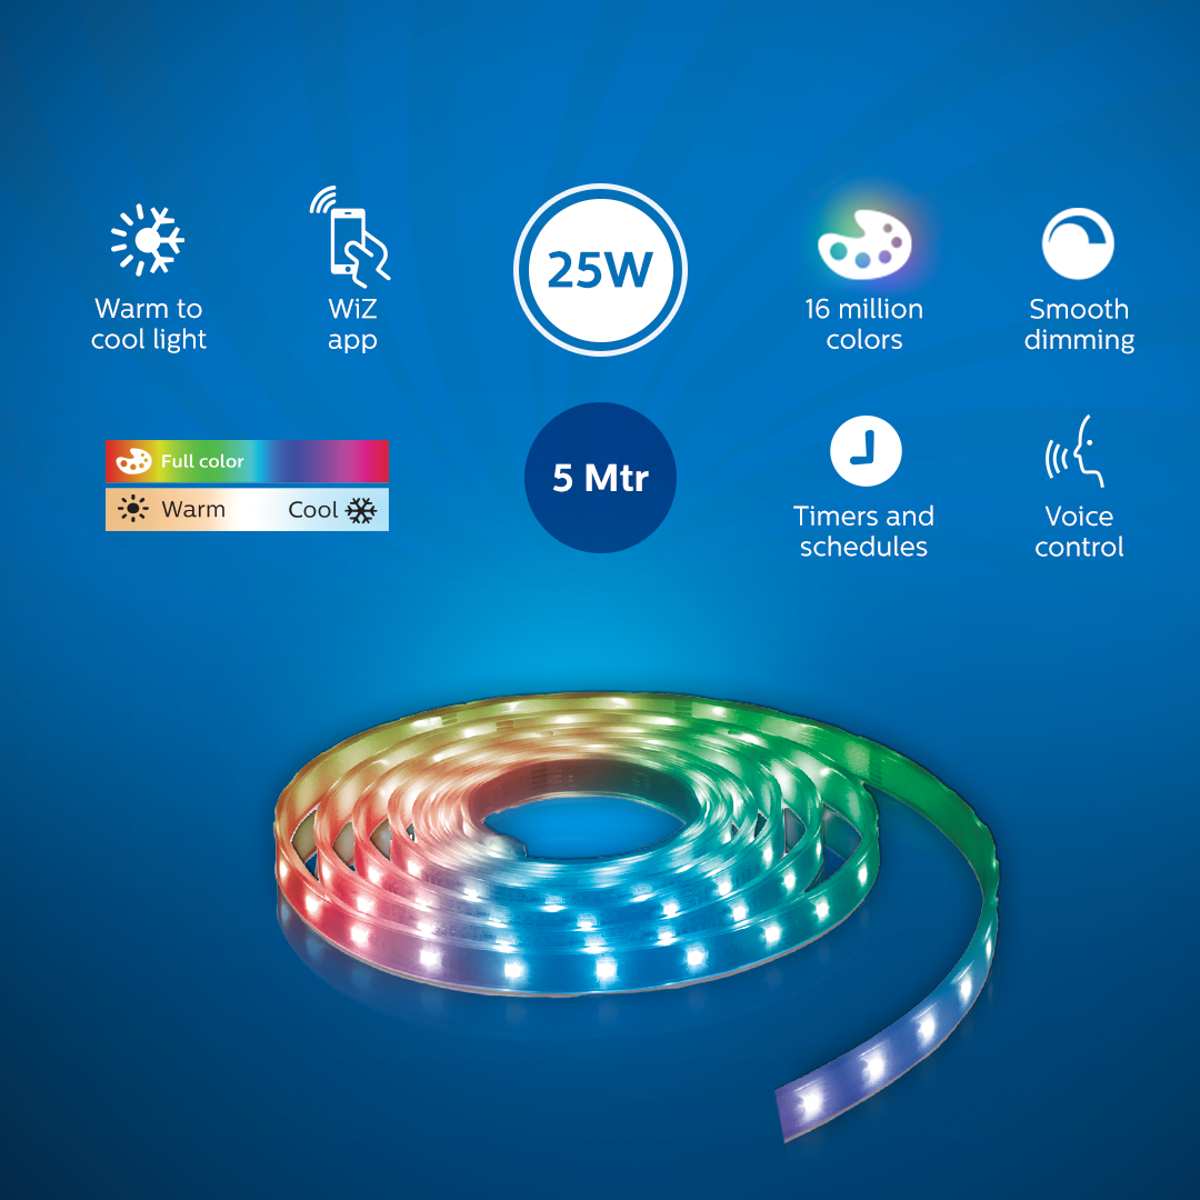 Philips Smart WiFi LED Strip light (Wiz Connected)